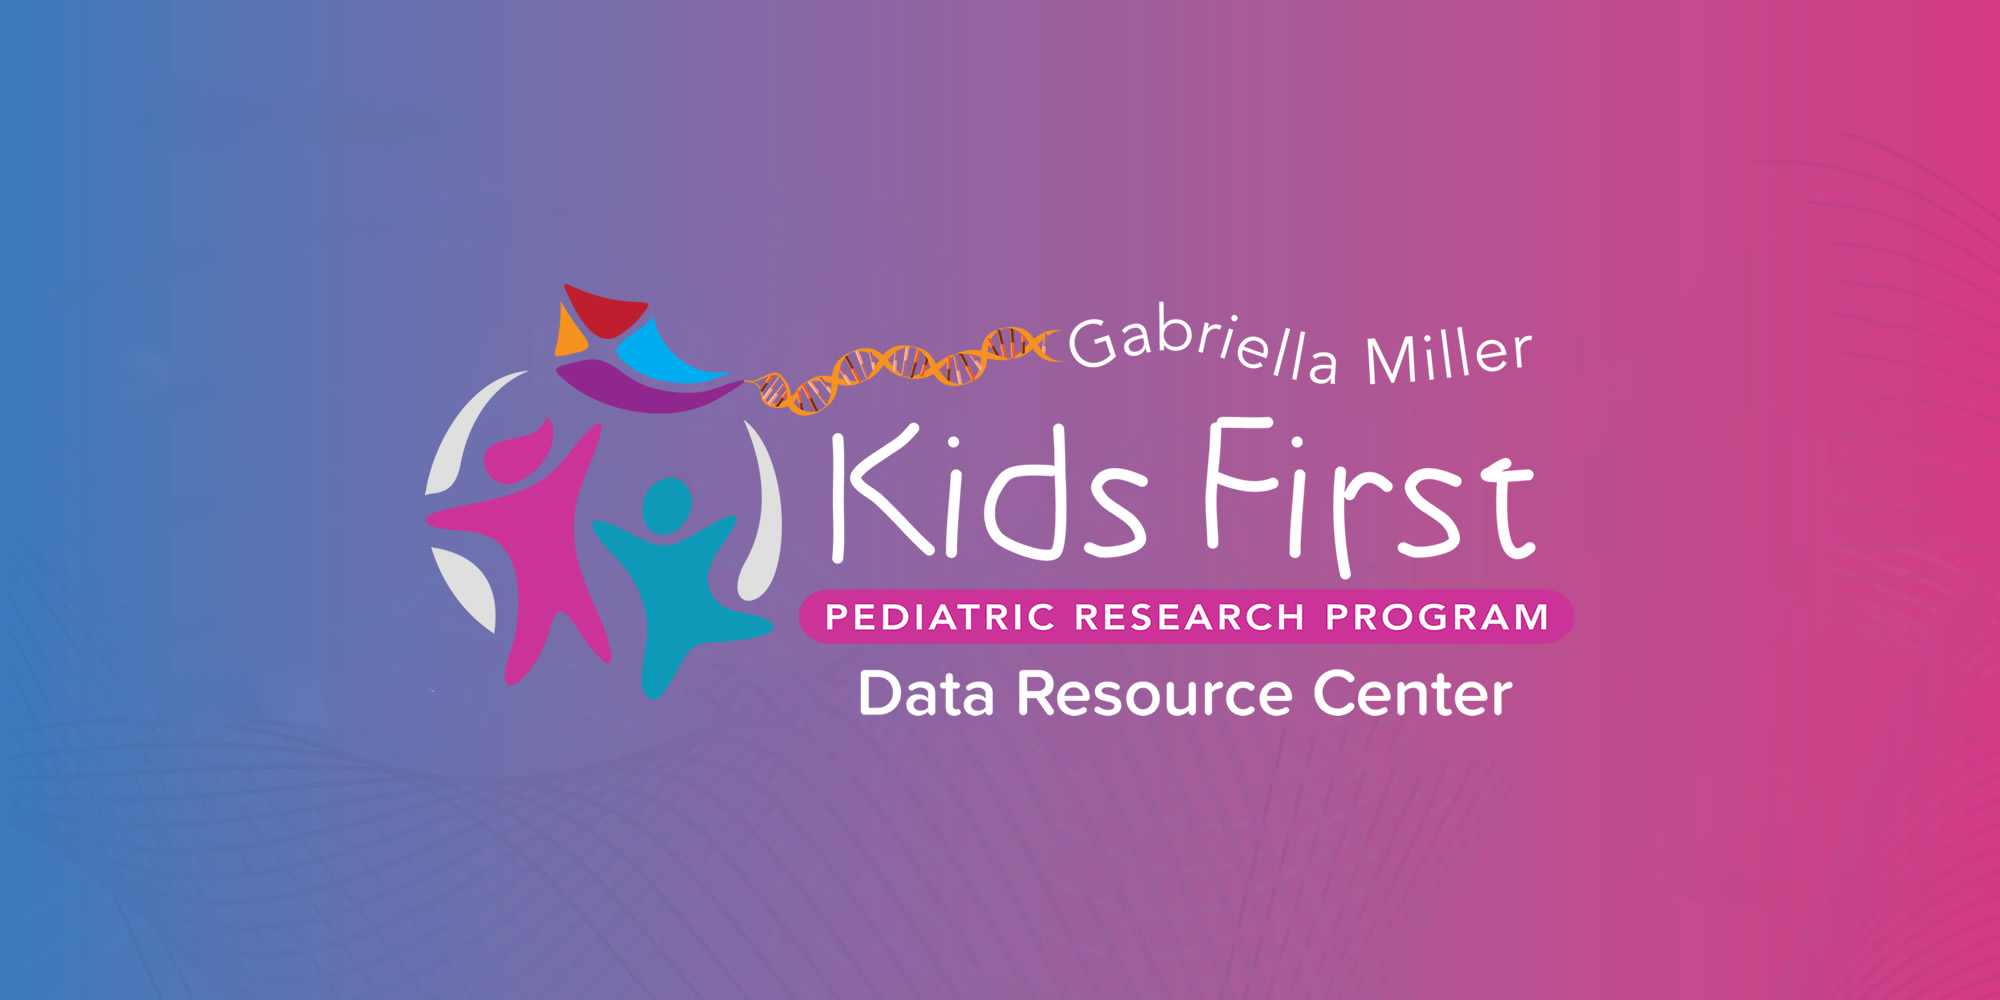 VALUABLE NEW DATASET GIVES INSIGHT INTO LINKS AMONG PEDIATRIC CONDITIONS